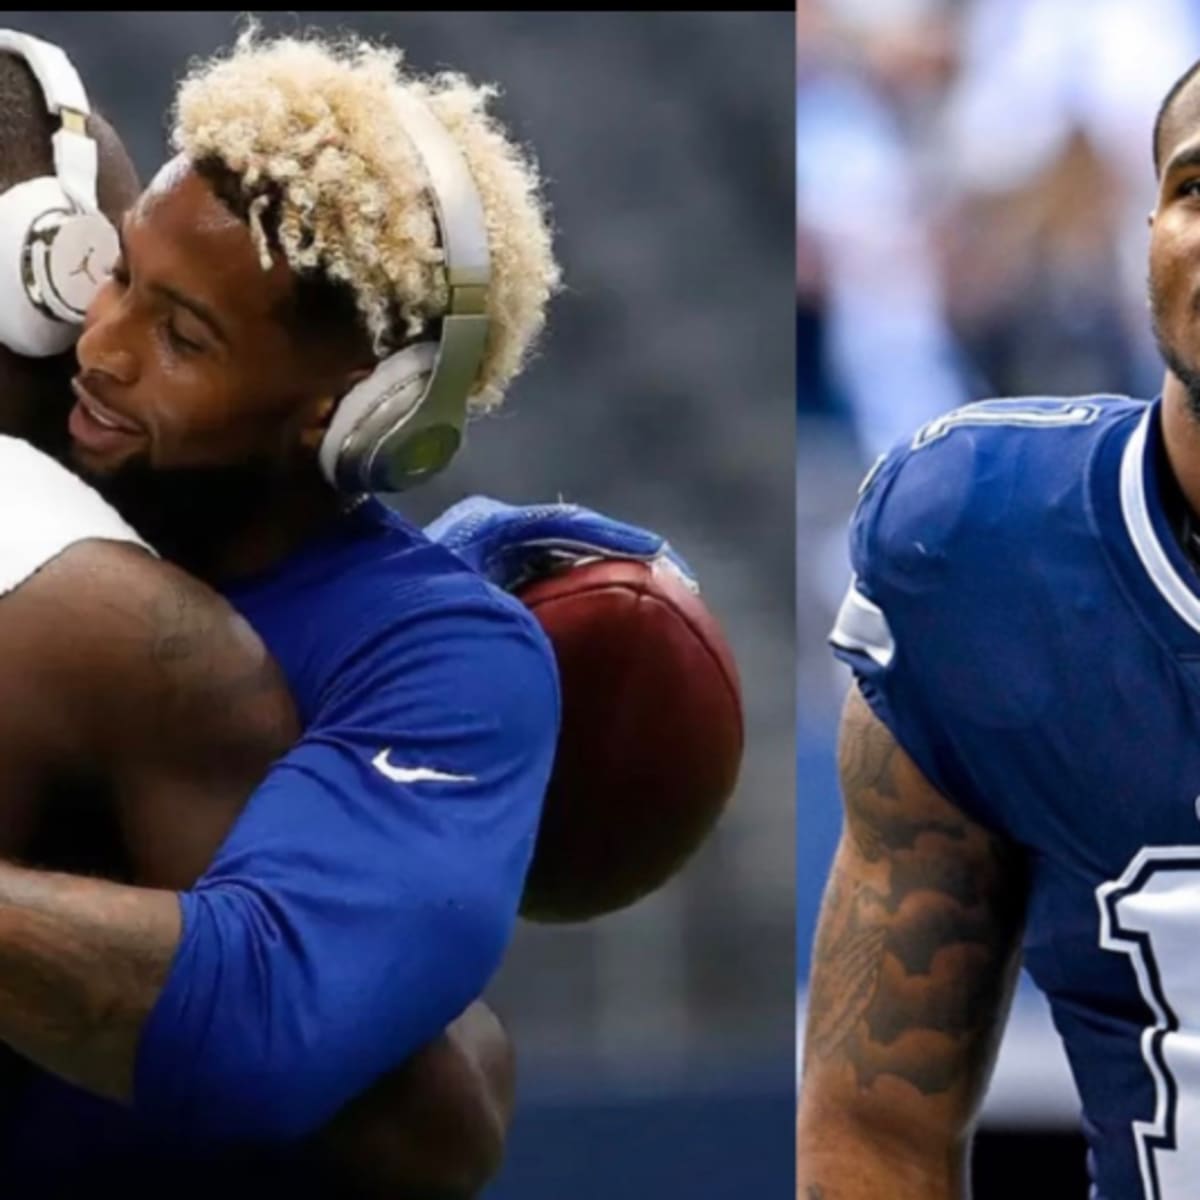 Odell Beckham Jr: Micah Parsons urges star receiver to join Dallas Cowboys  and help them reach the Super Bowl, NFL News